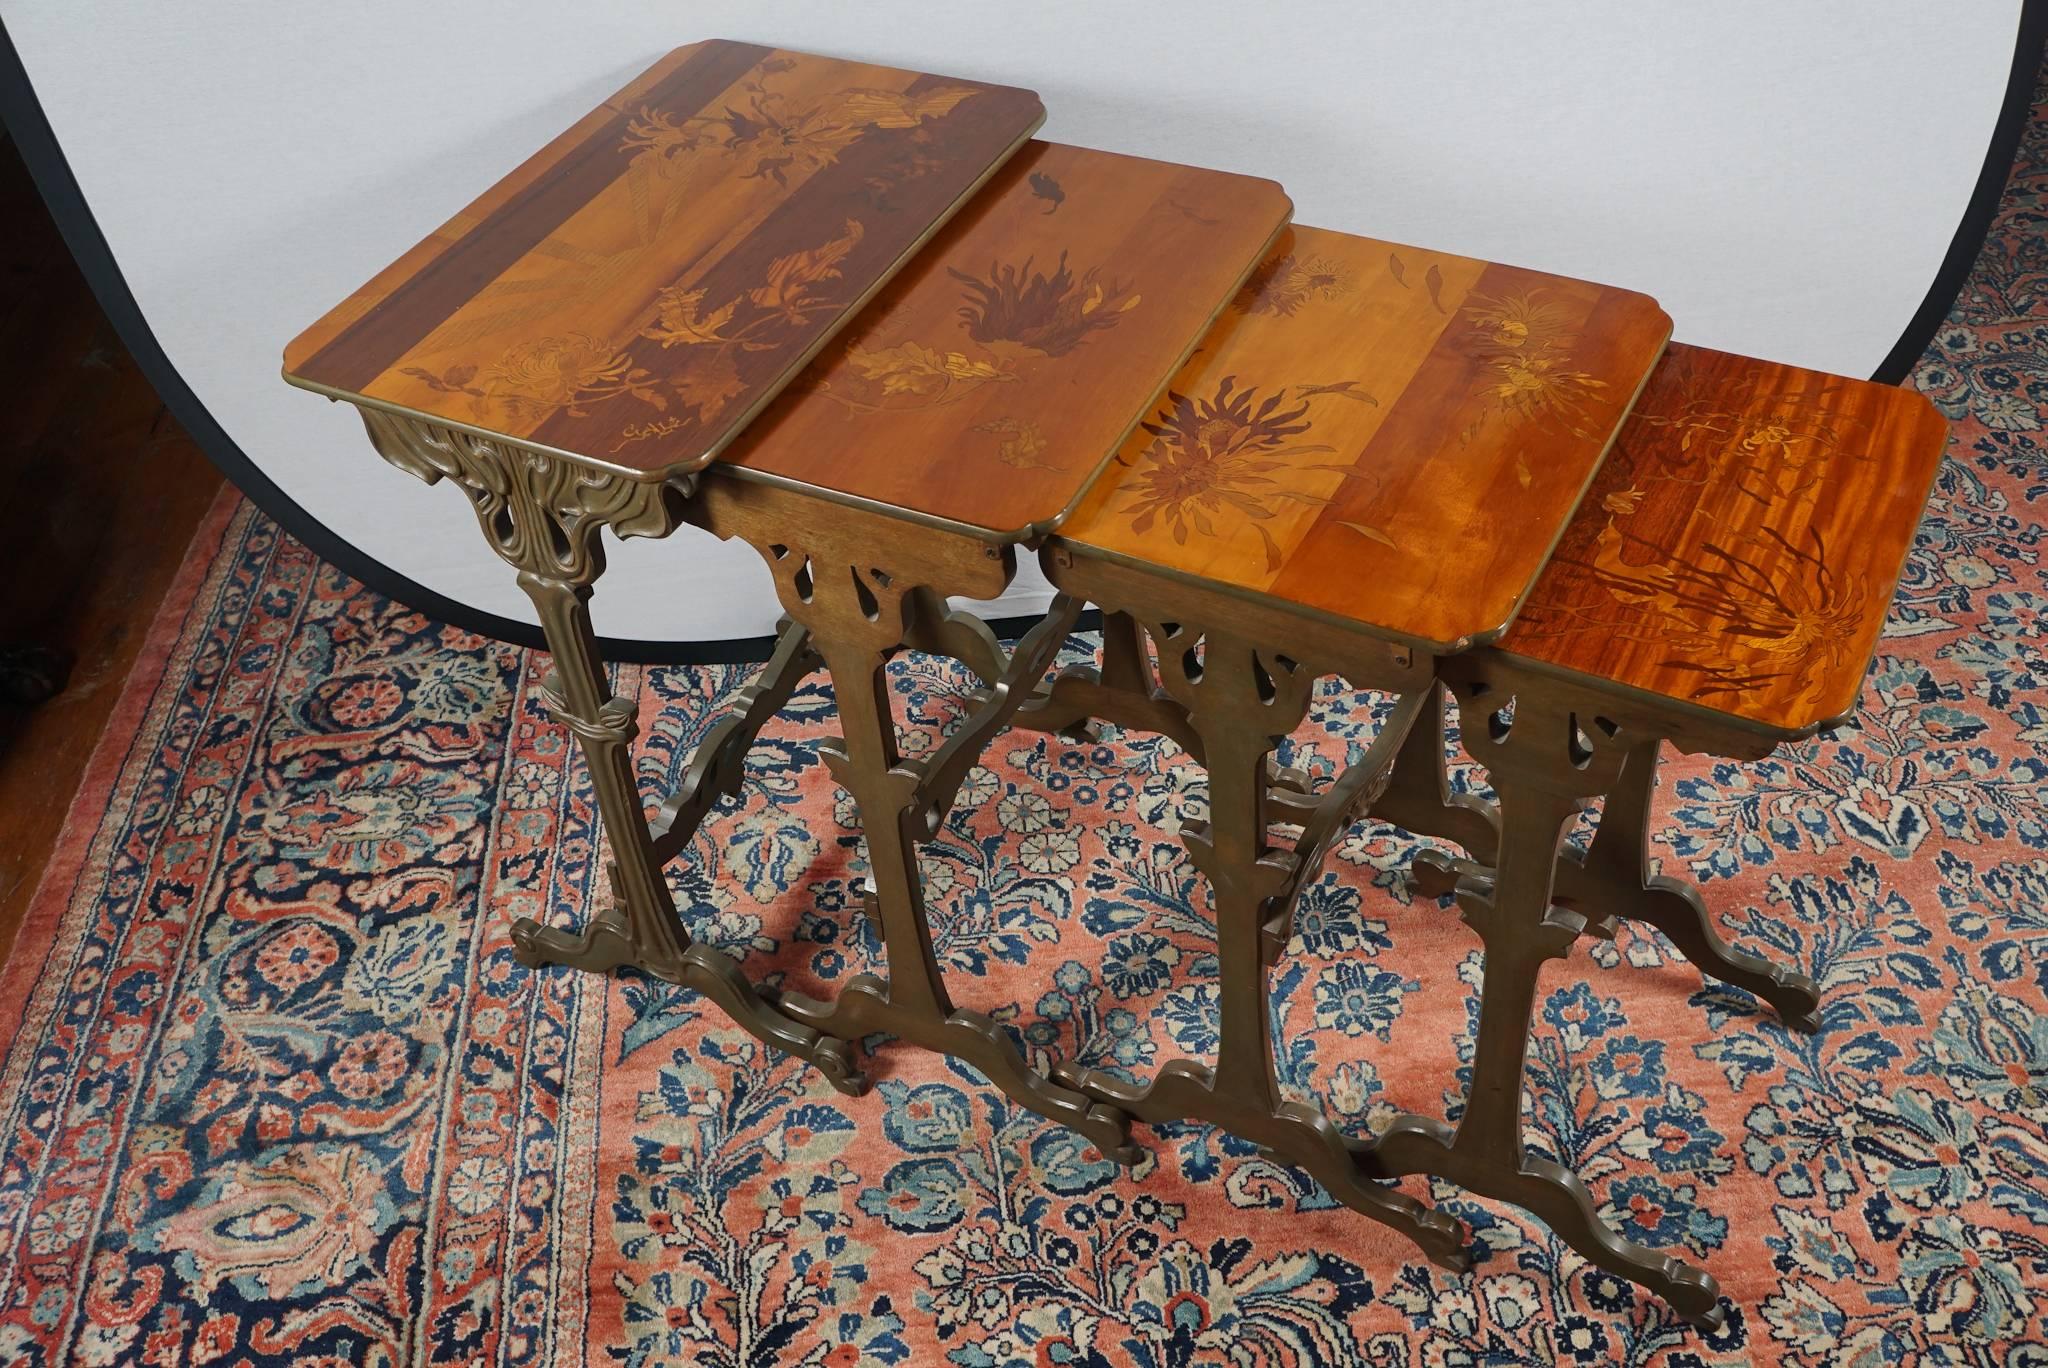 Fine set of French Art Nouveau inlaid nesting tables by Emil Gallé. Four graduated walnut tables with fruitwood marquetry. On carved faux-bronzed legs united by stretchers with down turned feet. 
Signed in inlay: 